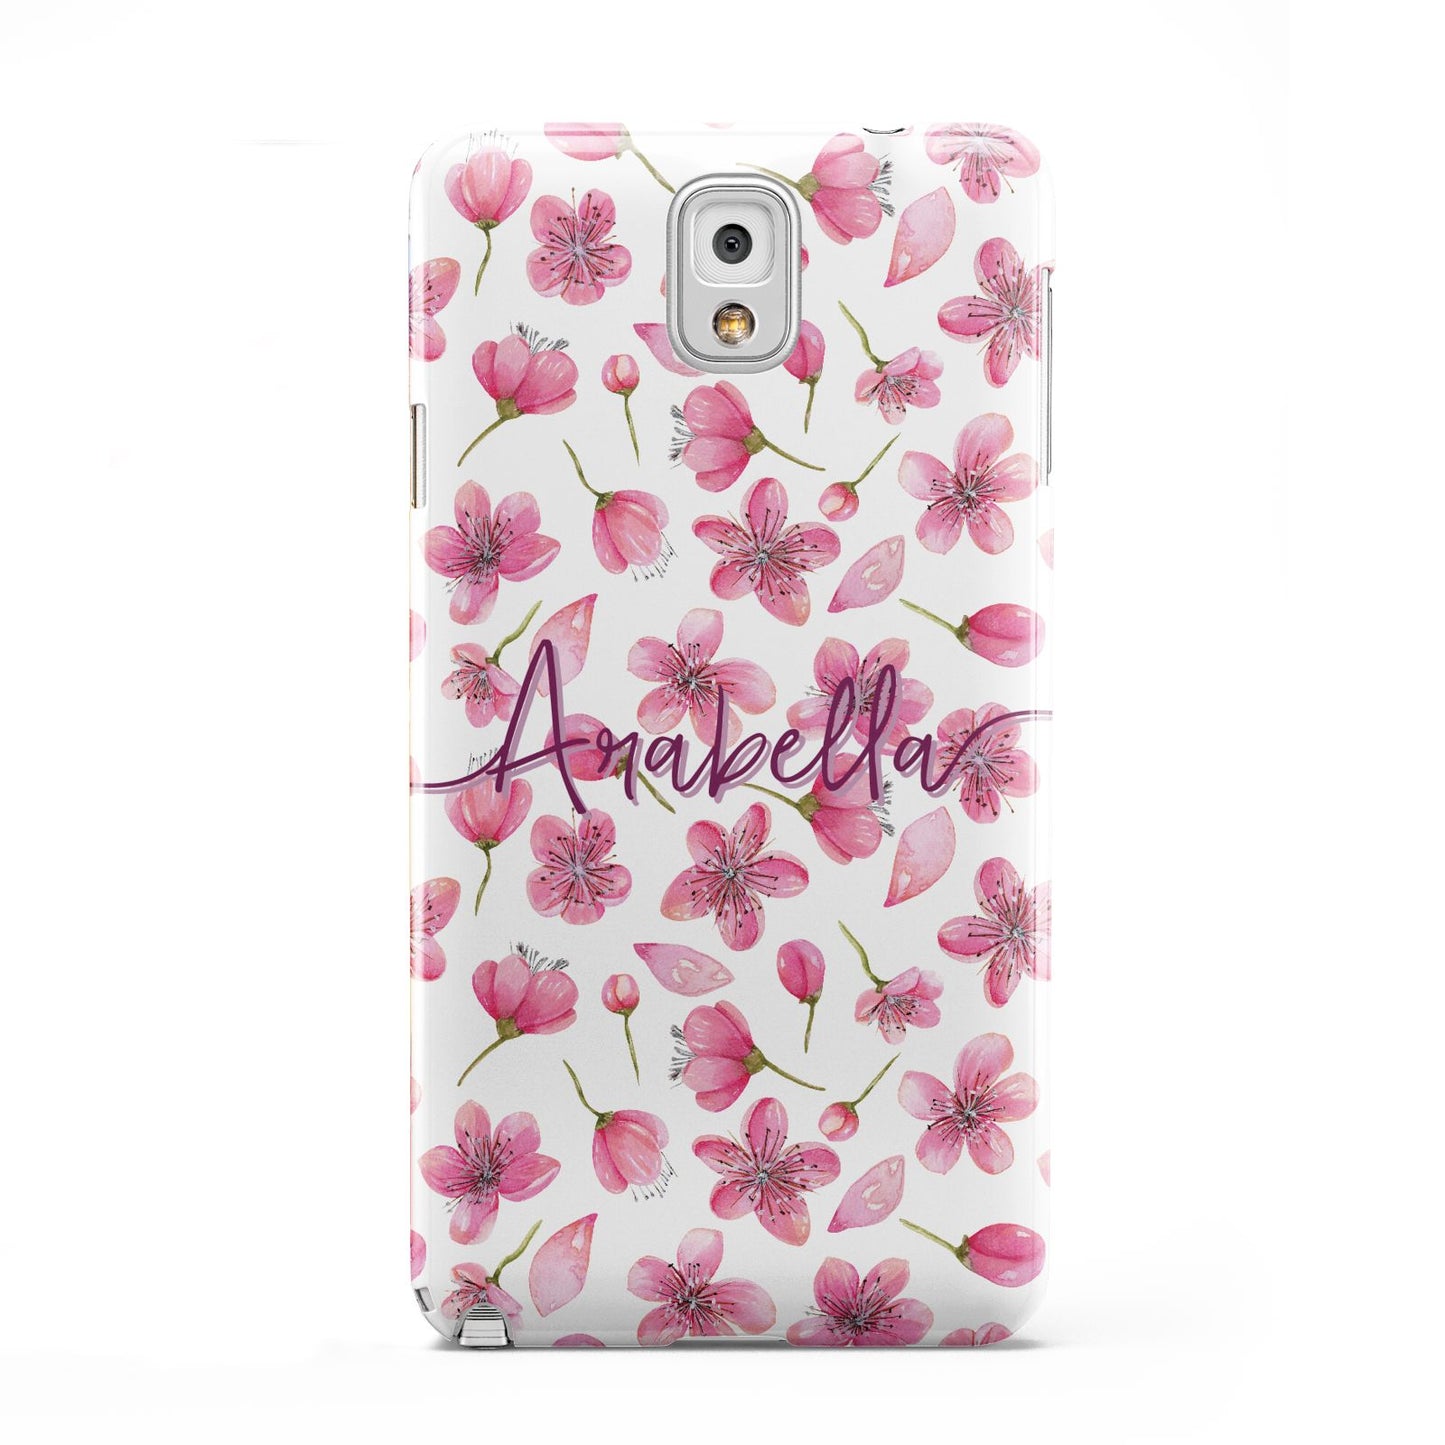 Personalised Blossom Pattern Pink Samsung Galaxy Note 3 Case